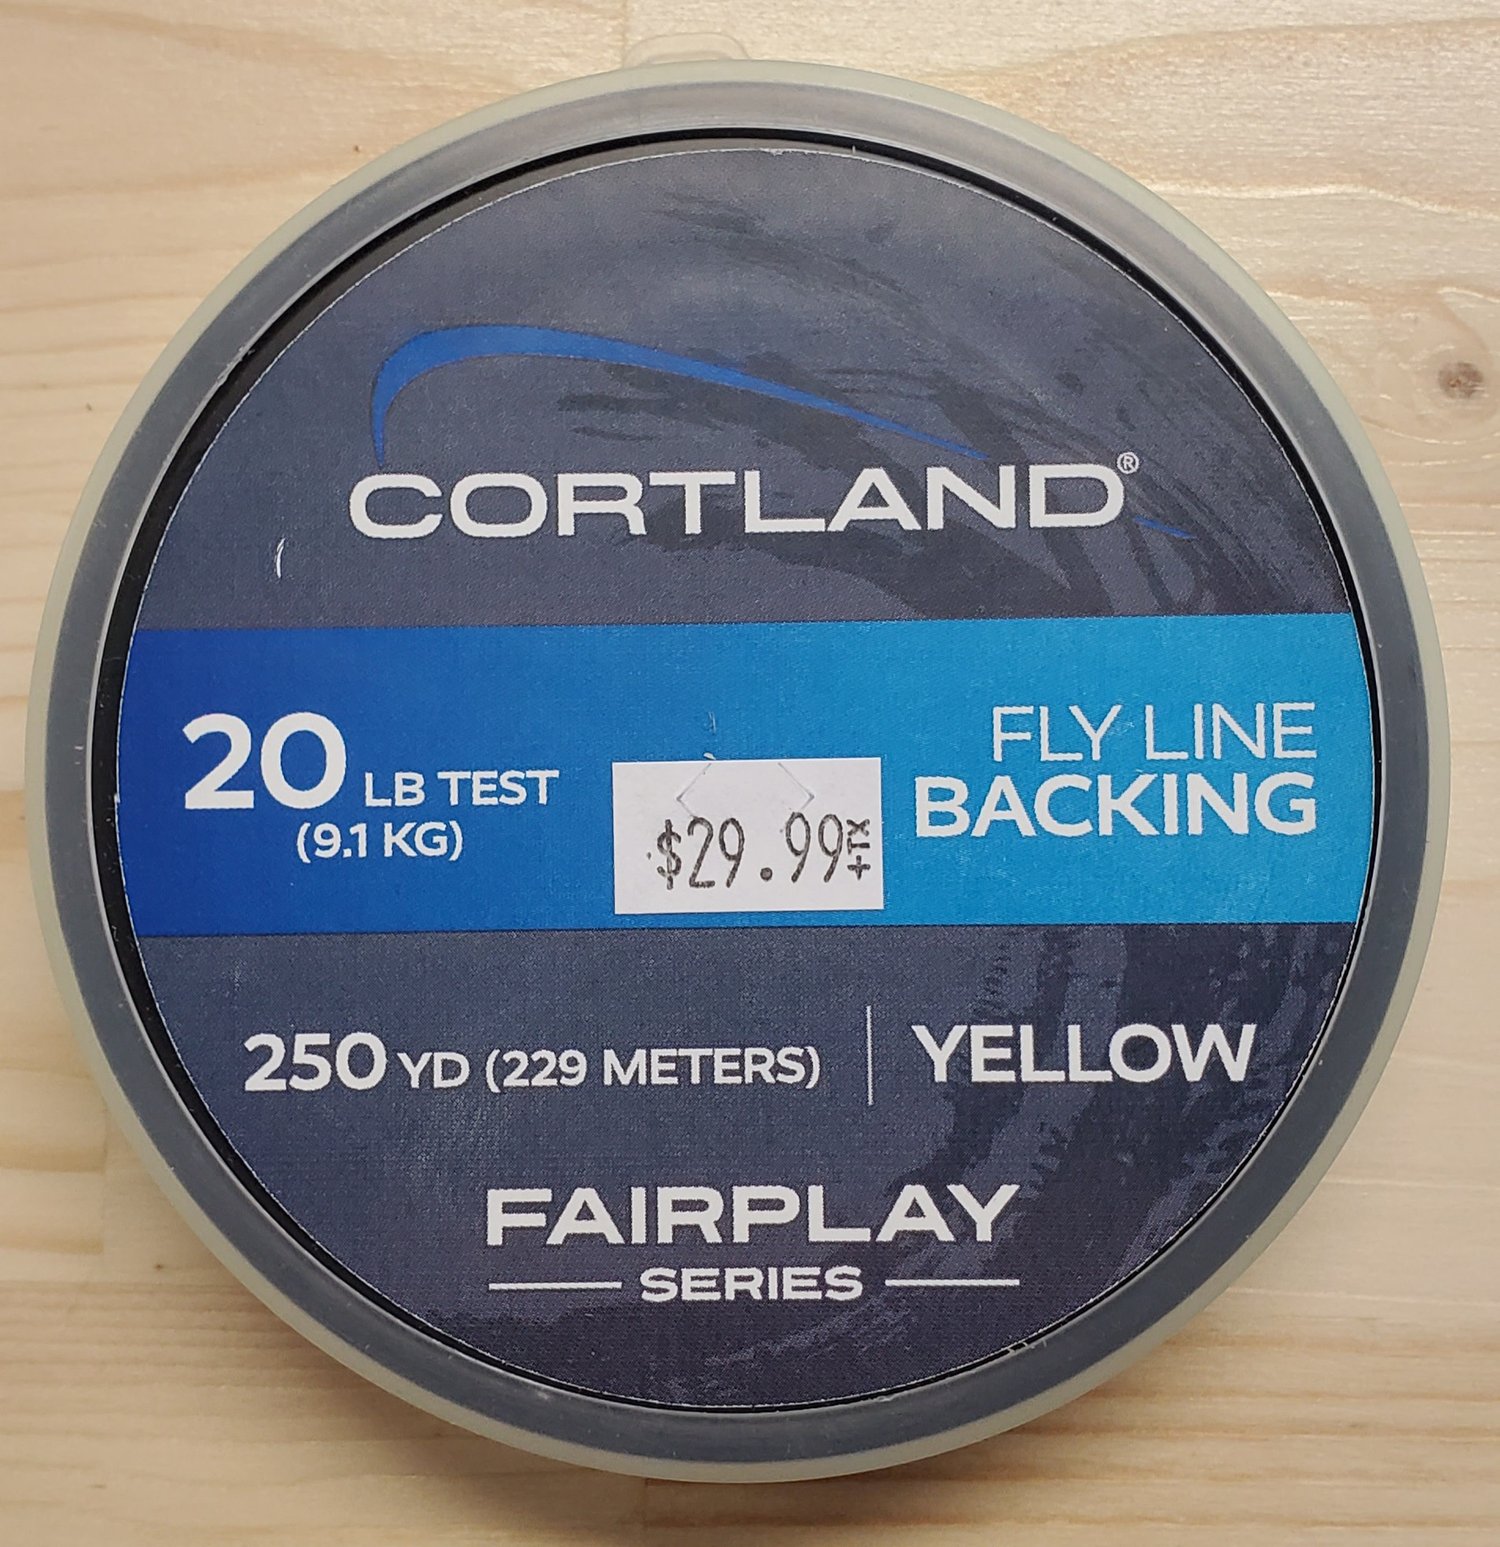 Cortland Fairplay Fly line backing yellow 20lbs 250yds — Fehr's Sporting  Goods